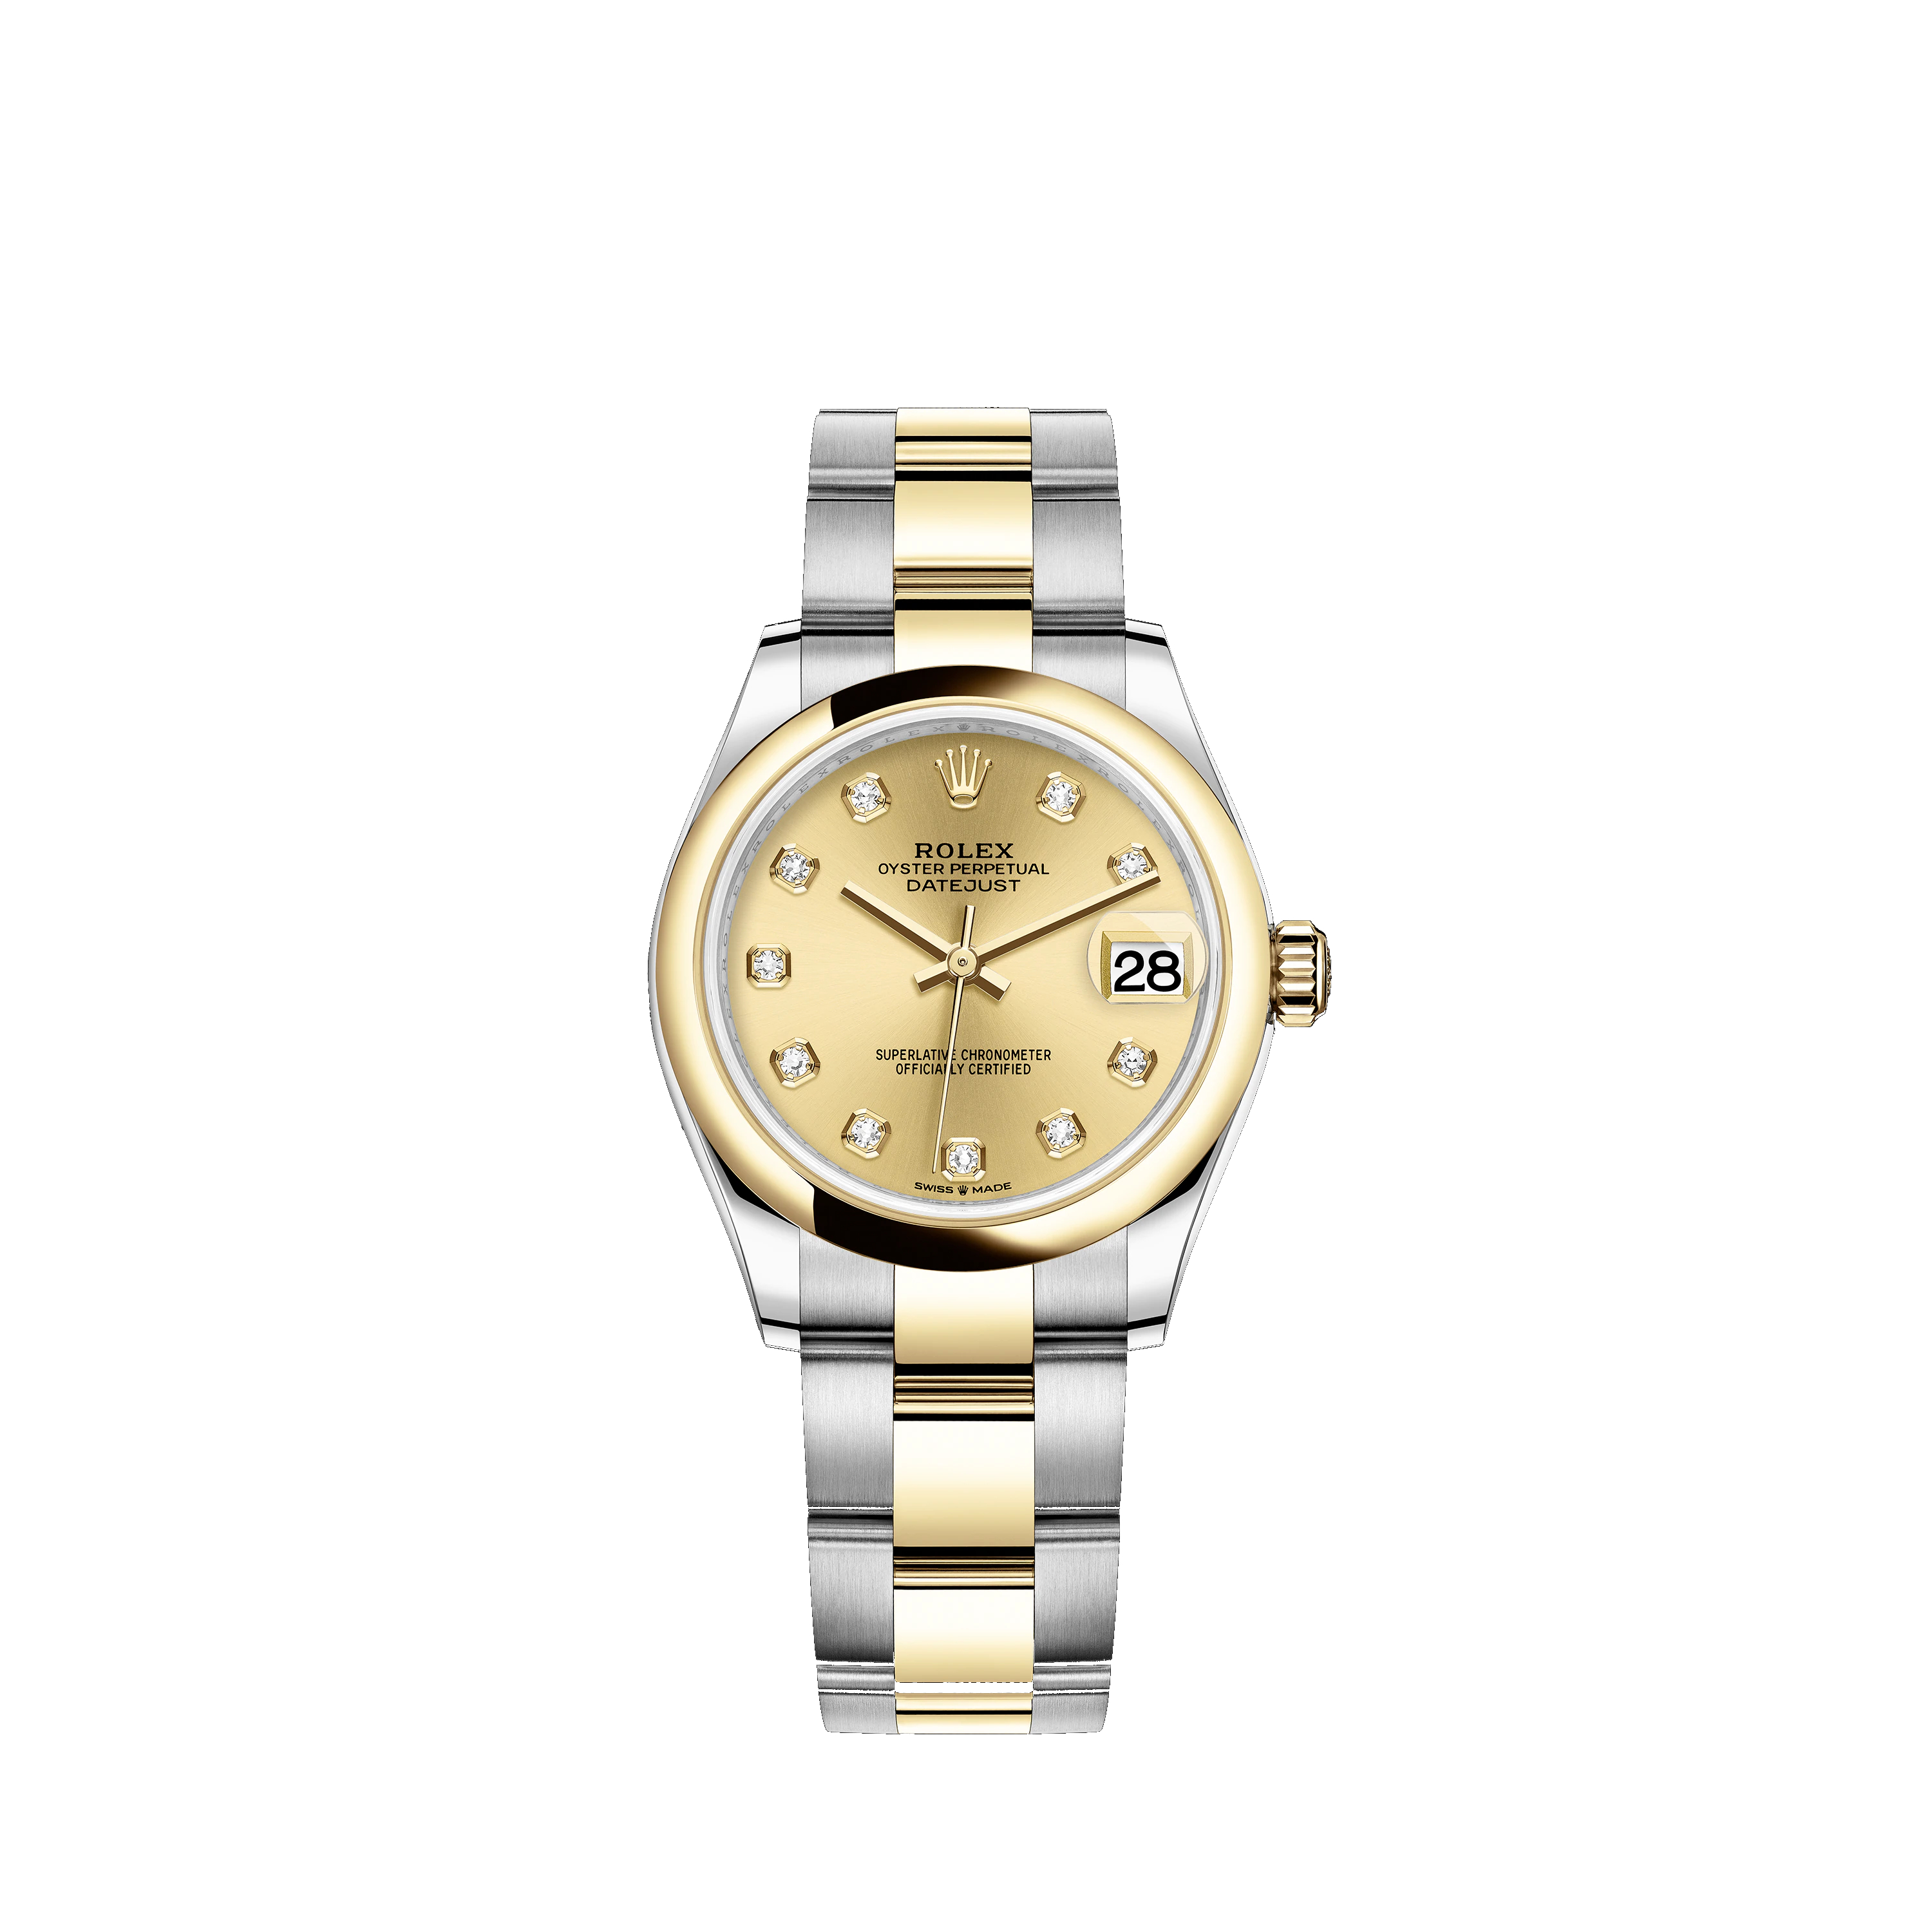 Datejust 31 278243 Gold & Stainless Watch (Champagne-Colour Set with Diamonds)